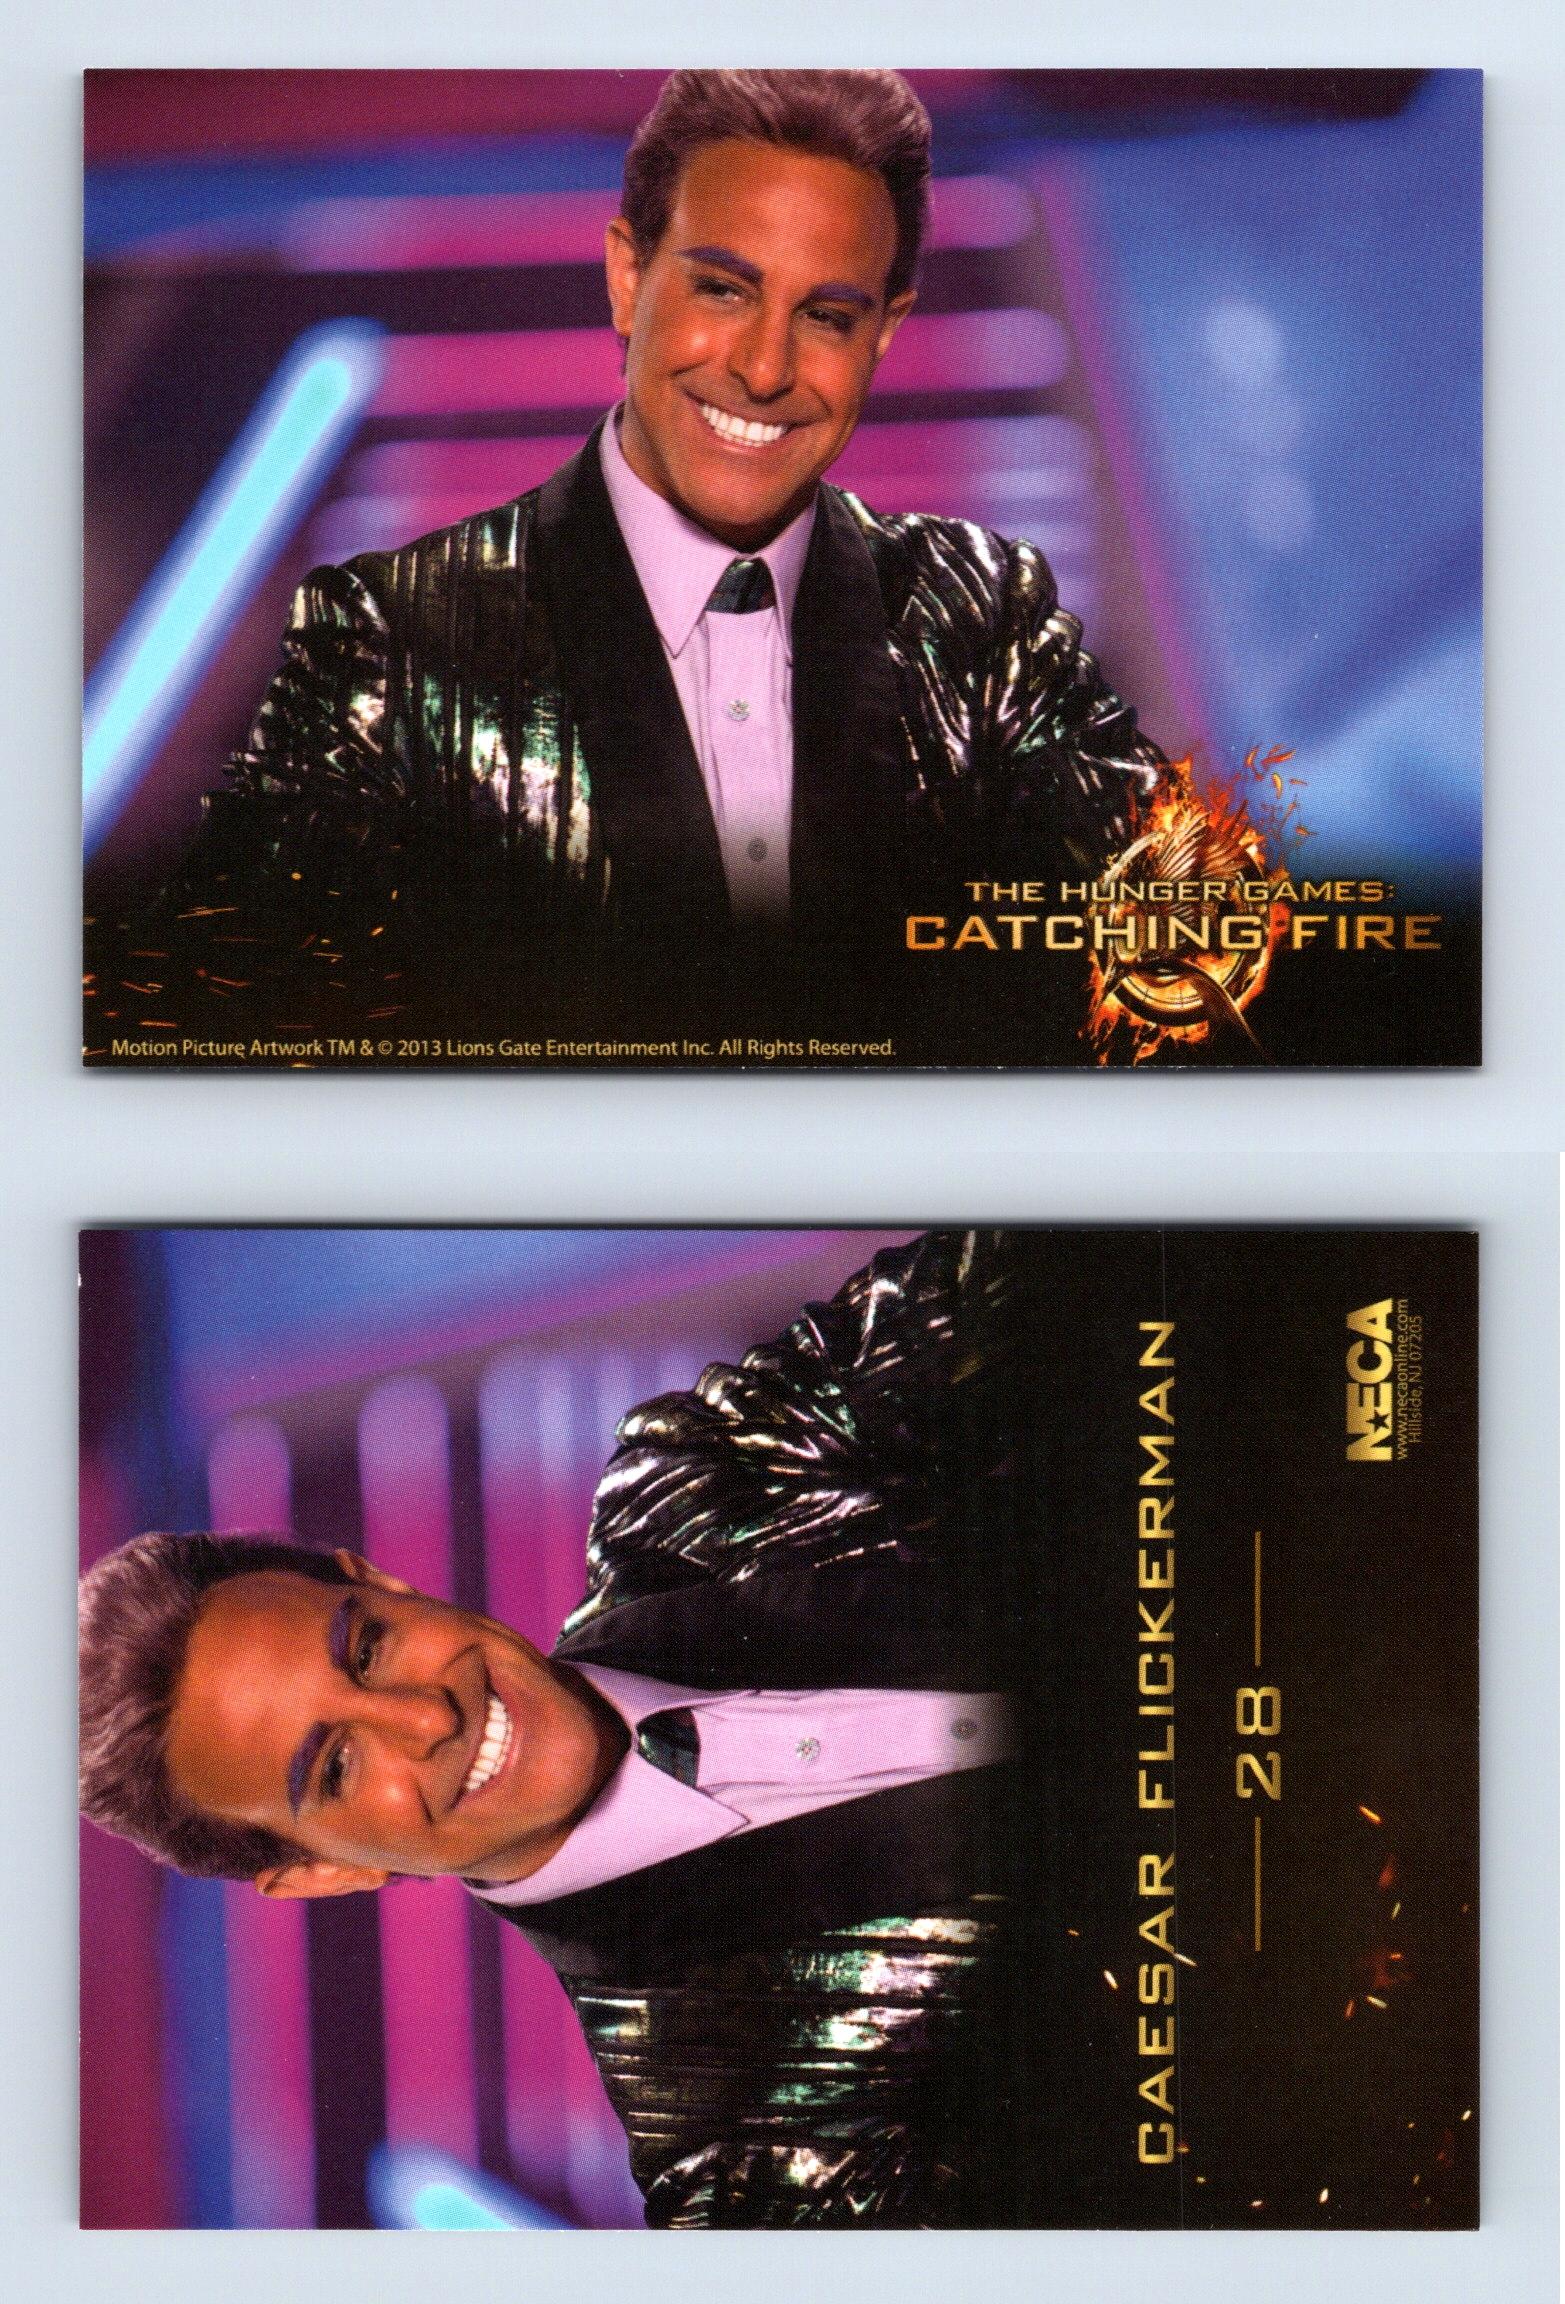 Complete Trading Card Set ALL 40! THE HUNGER GAMES CATCHING FIRE Neca/2013 